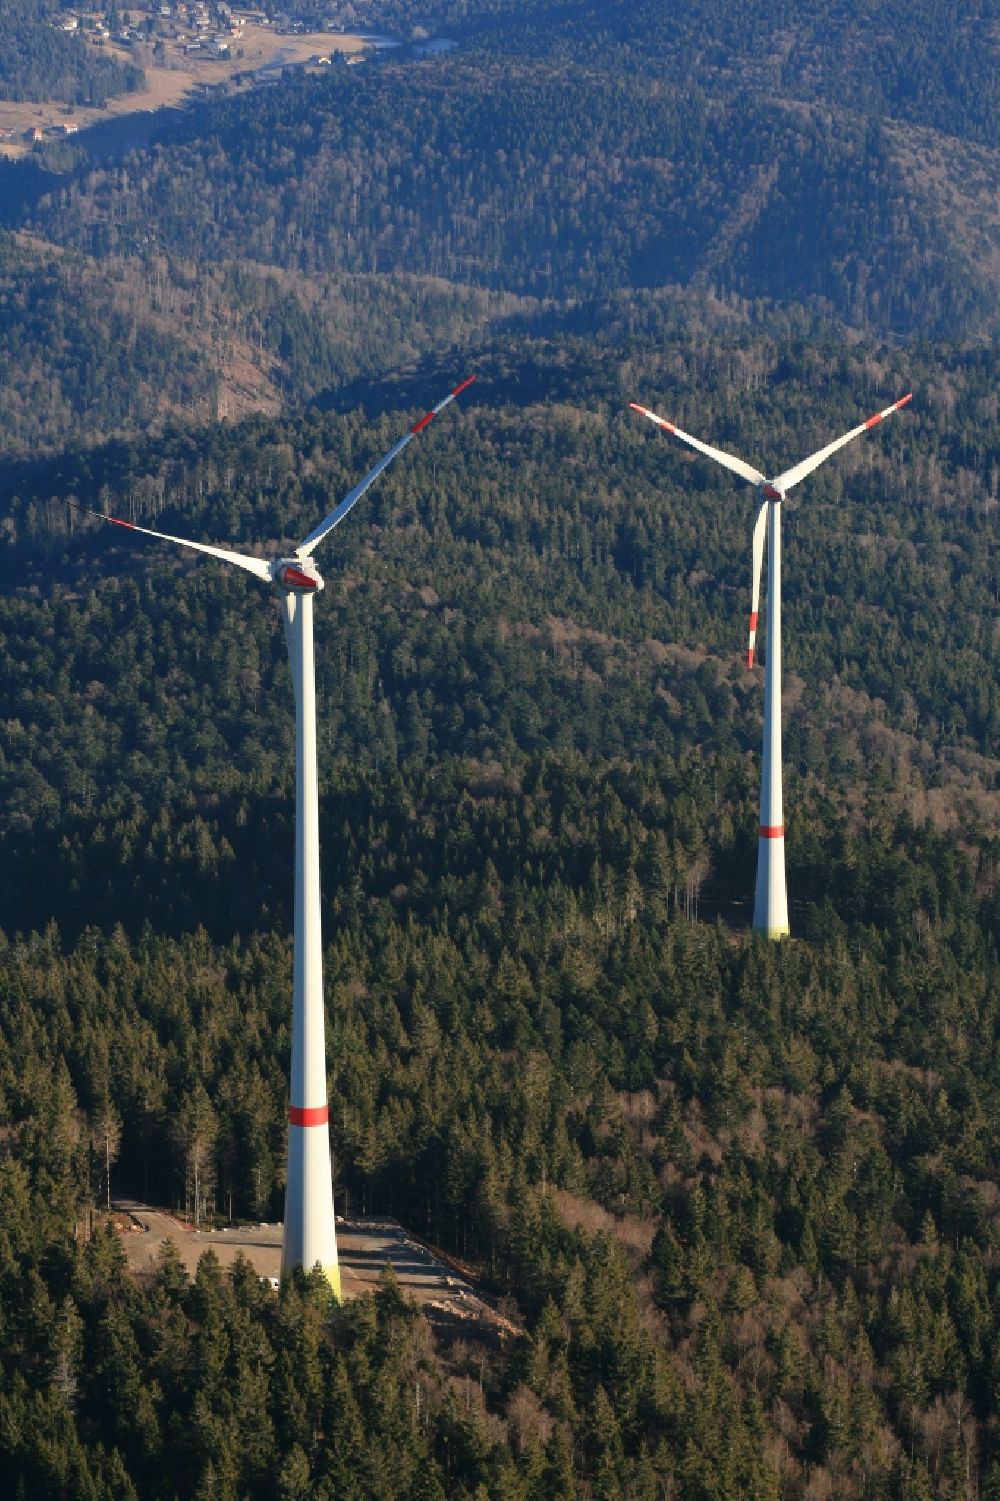 Aerial image Schopfheim - On the Rohrenkopf, the local mountain of Gersbach, a district of Schopfheim in Baden-Wuerttemberg, wind turbines have started operation. It is the first wind farm in the south of the Black Forest